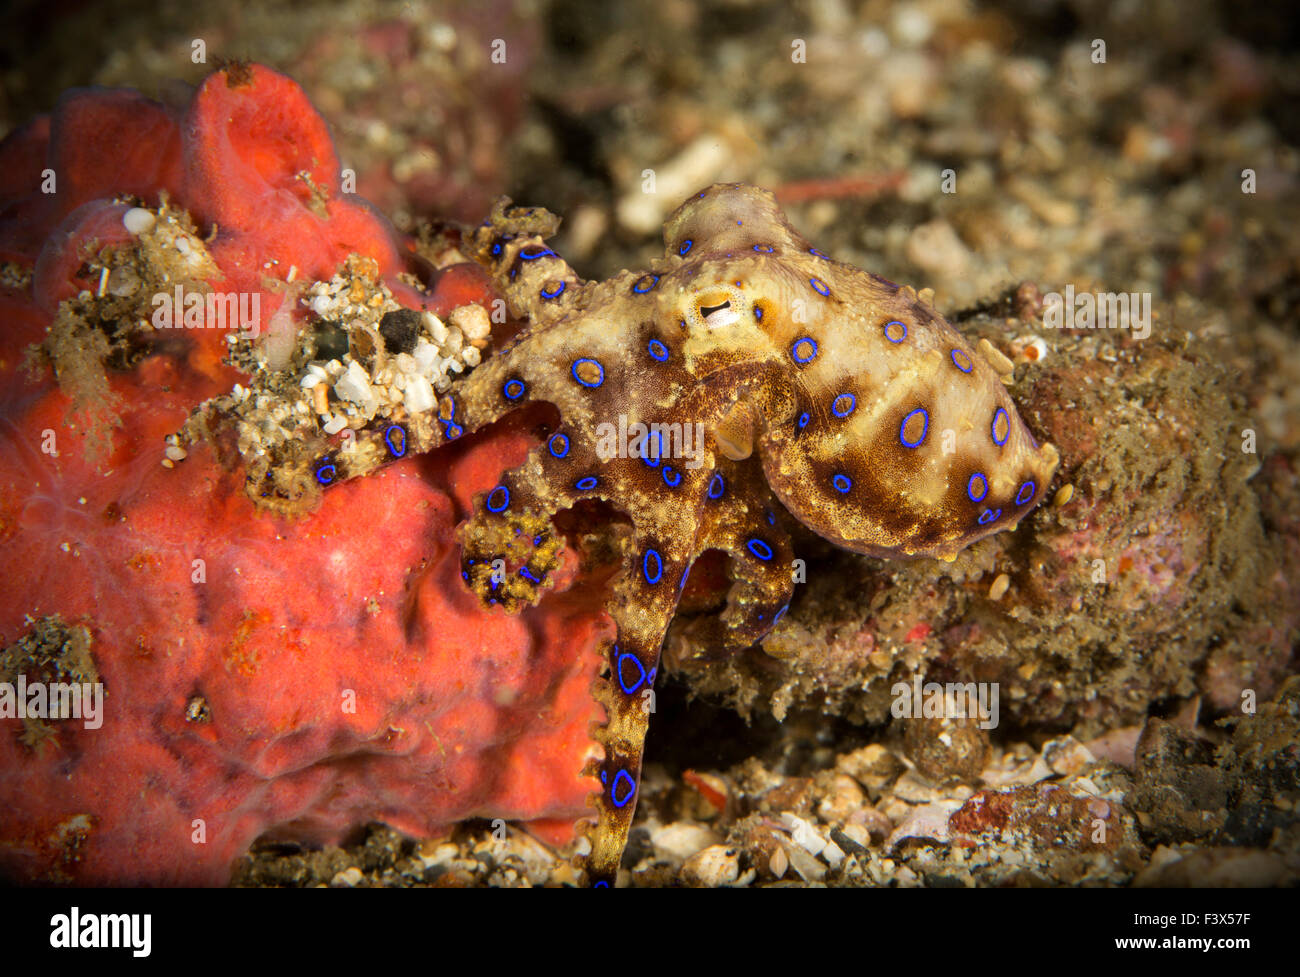 Blue Ring Octopus moving off from resting on pink sponge Stock Photo